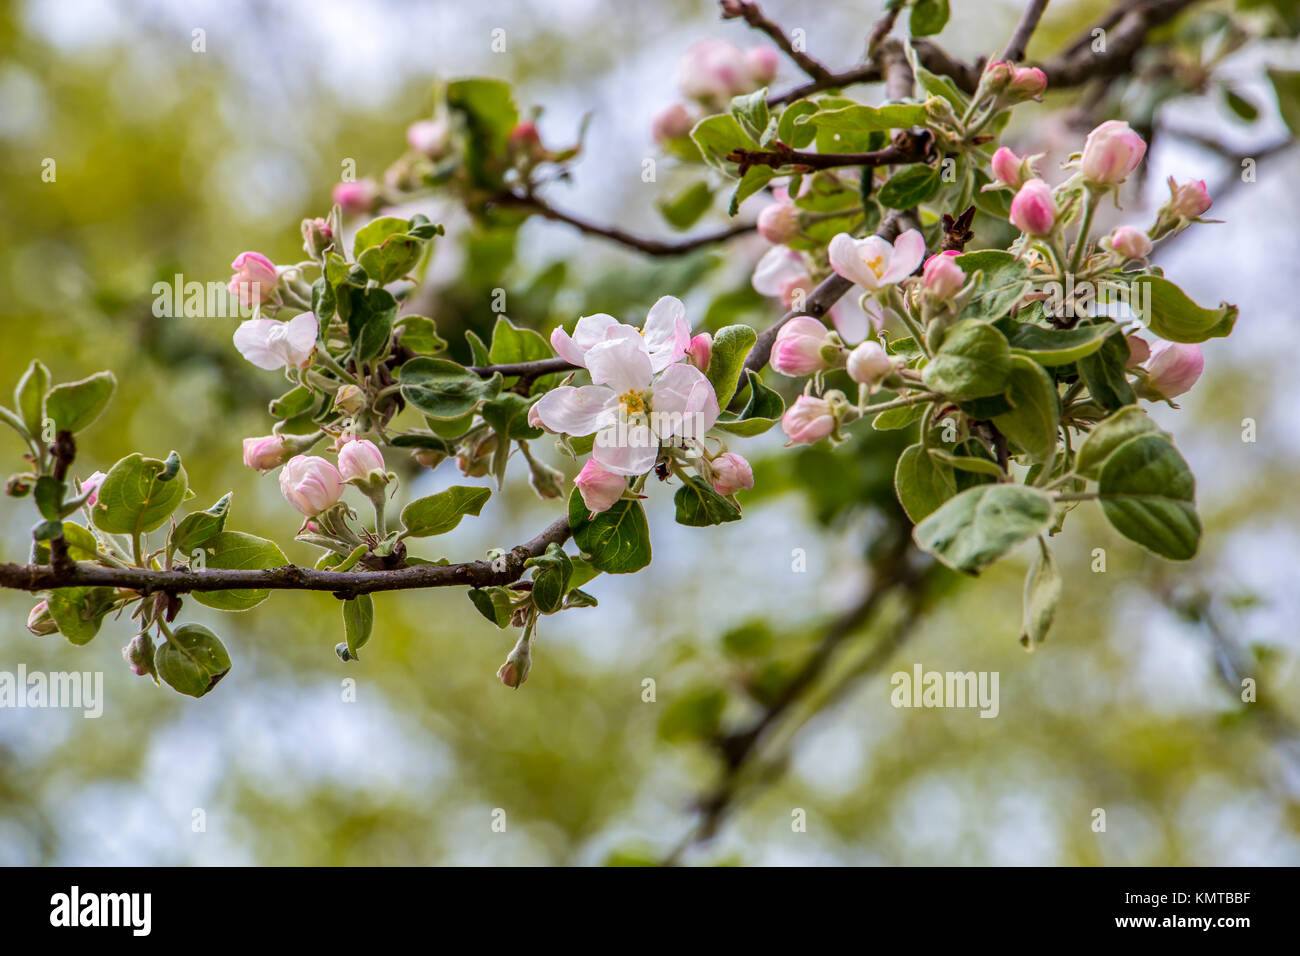 White apple tree bloosoms and green leaves Stock Photo